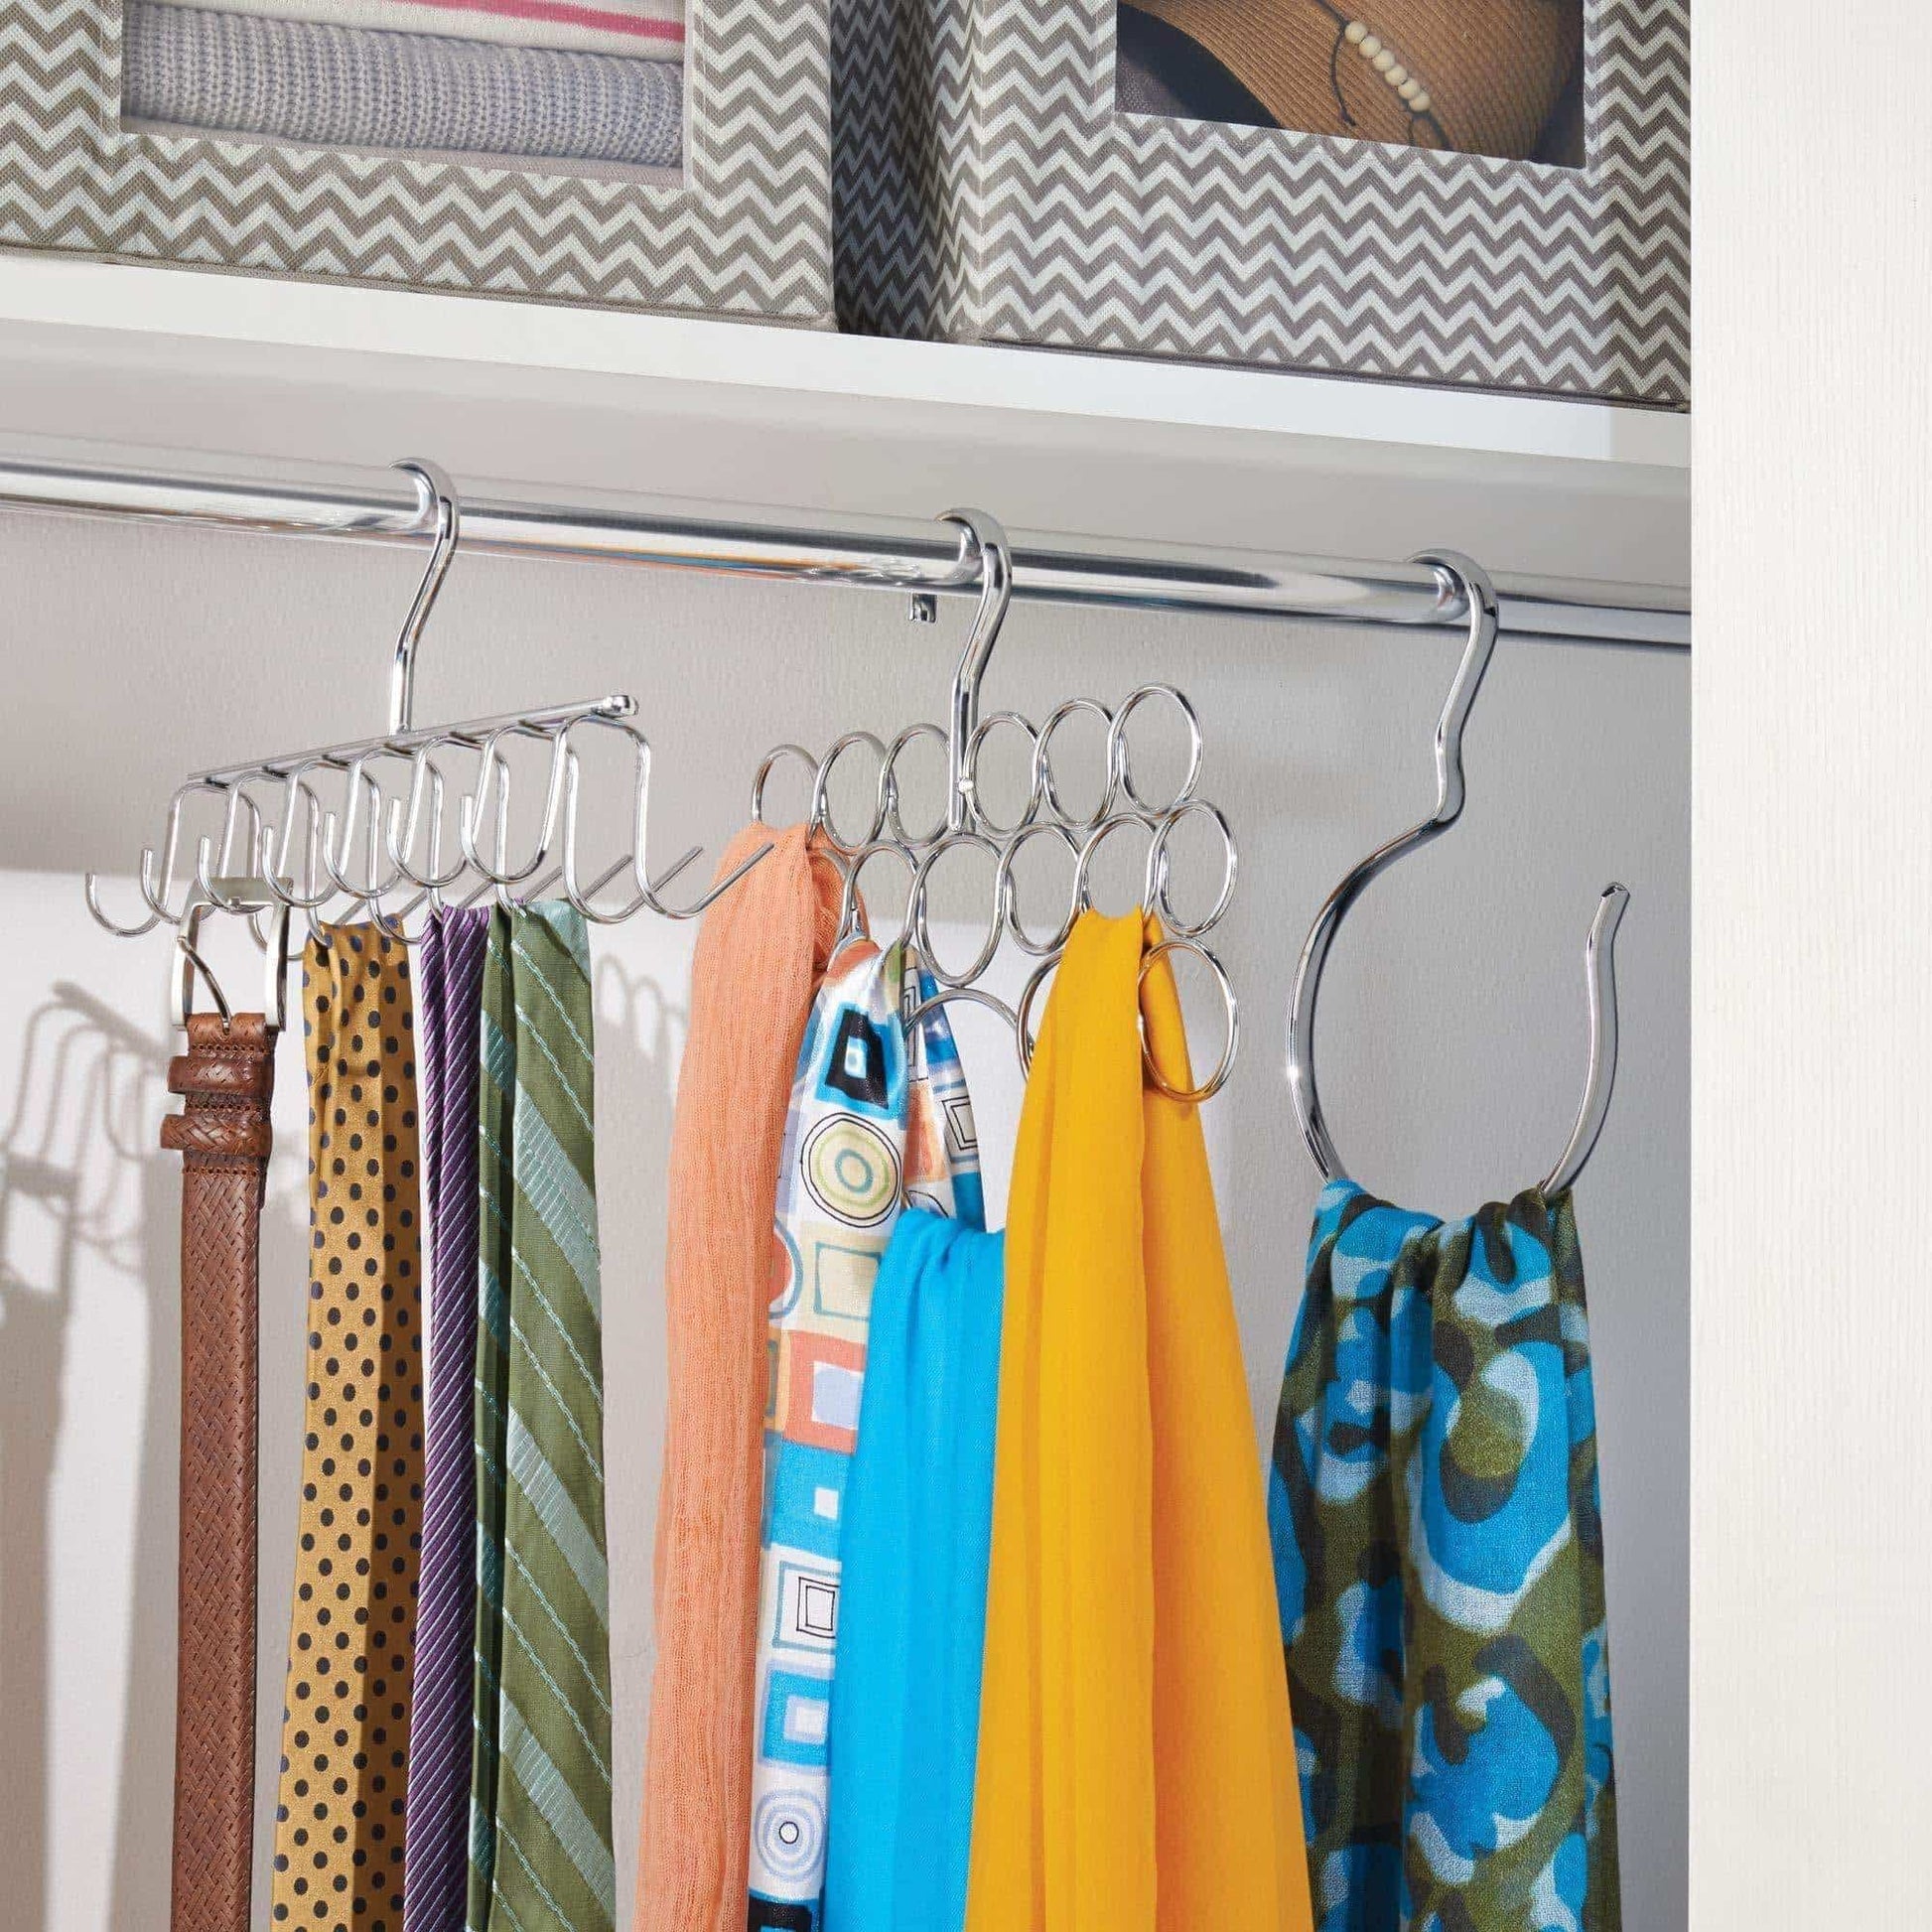 Organize with interdesign axis closet storage organizer rack for ties and belts chrome